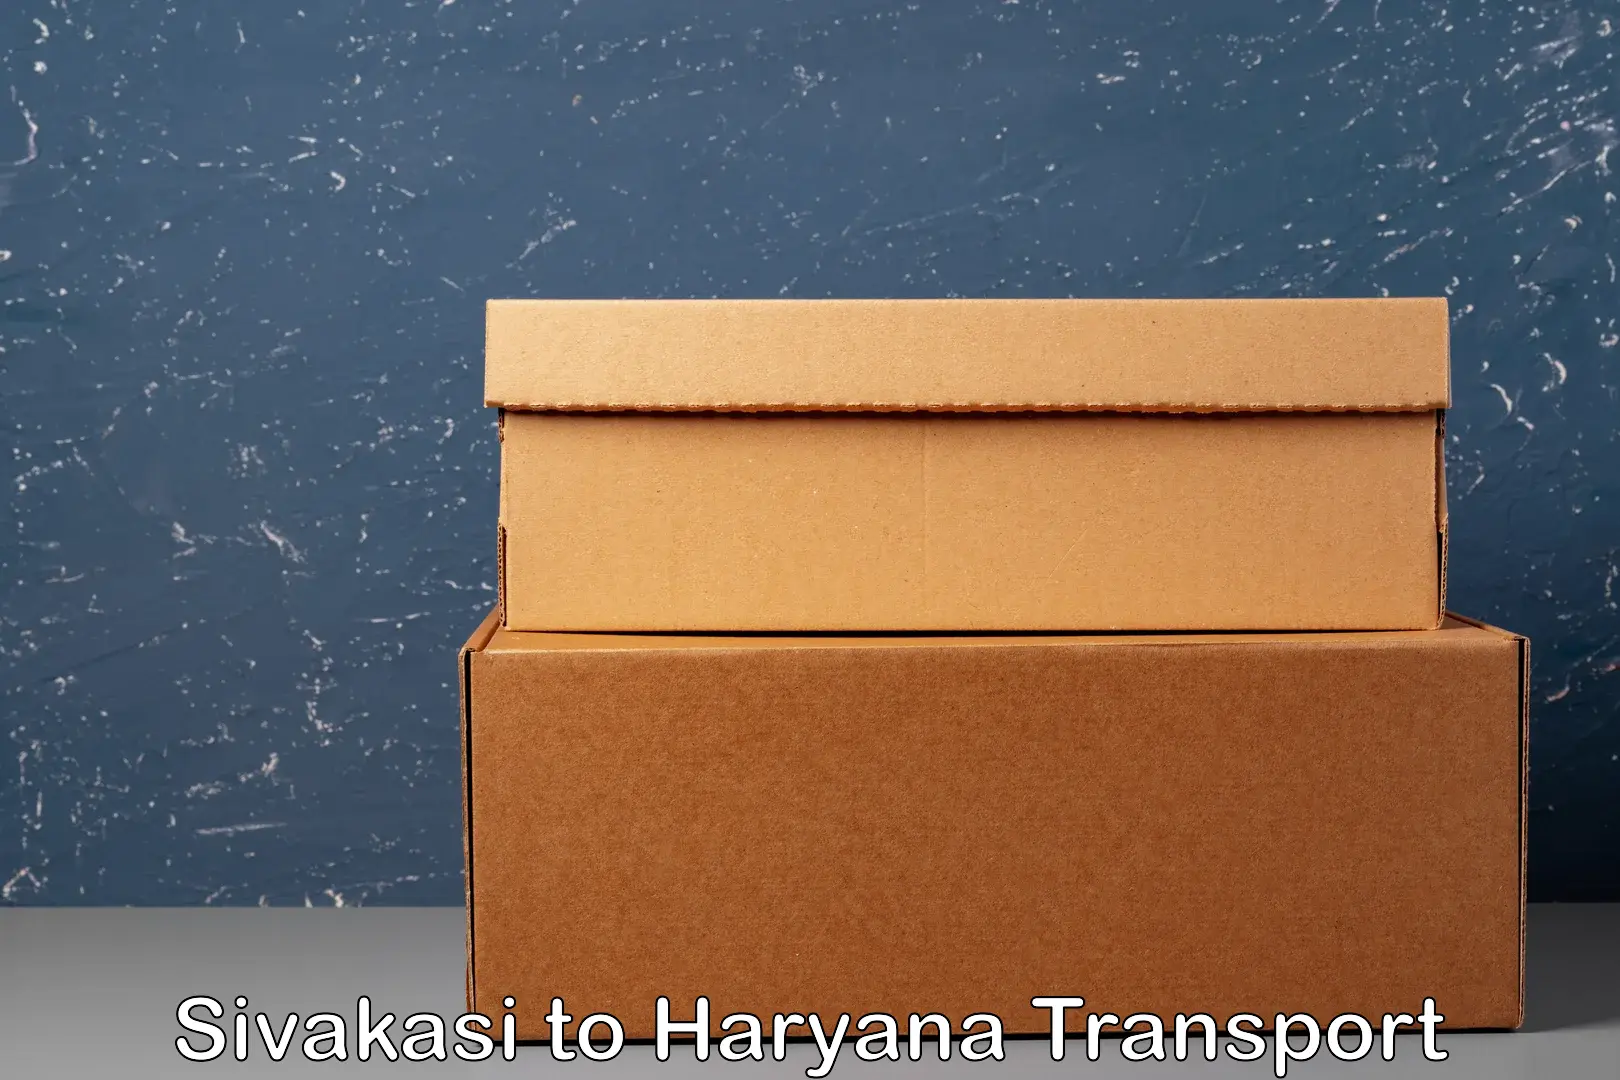 Commercial transport service Sivakasi to Gurgaon